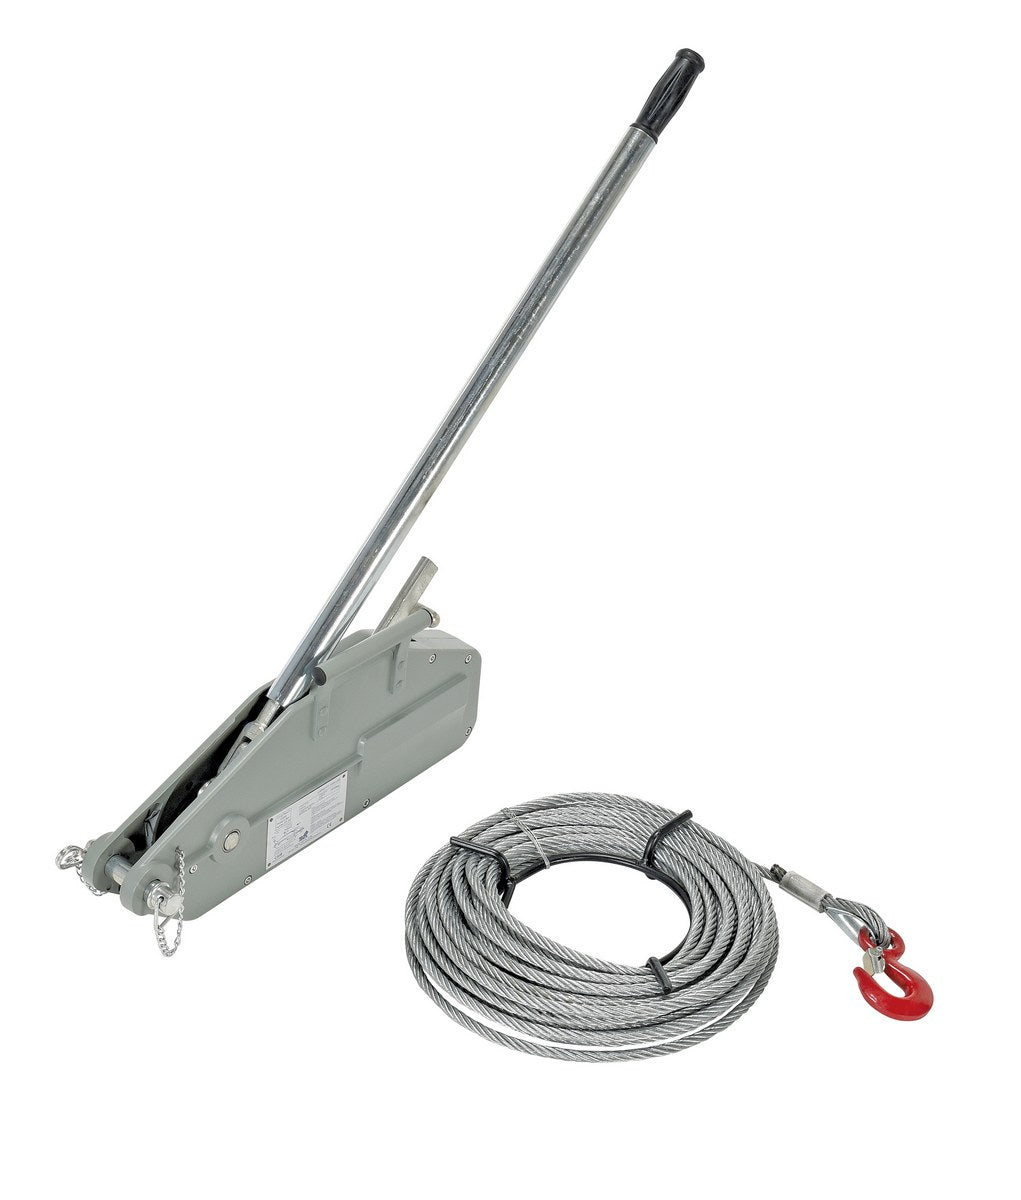 Vestil Long Reach Cable Puller With 60ft Wire Rope